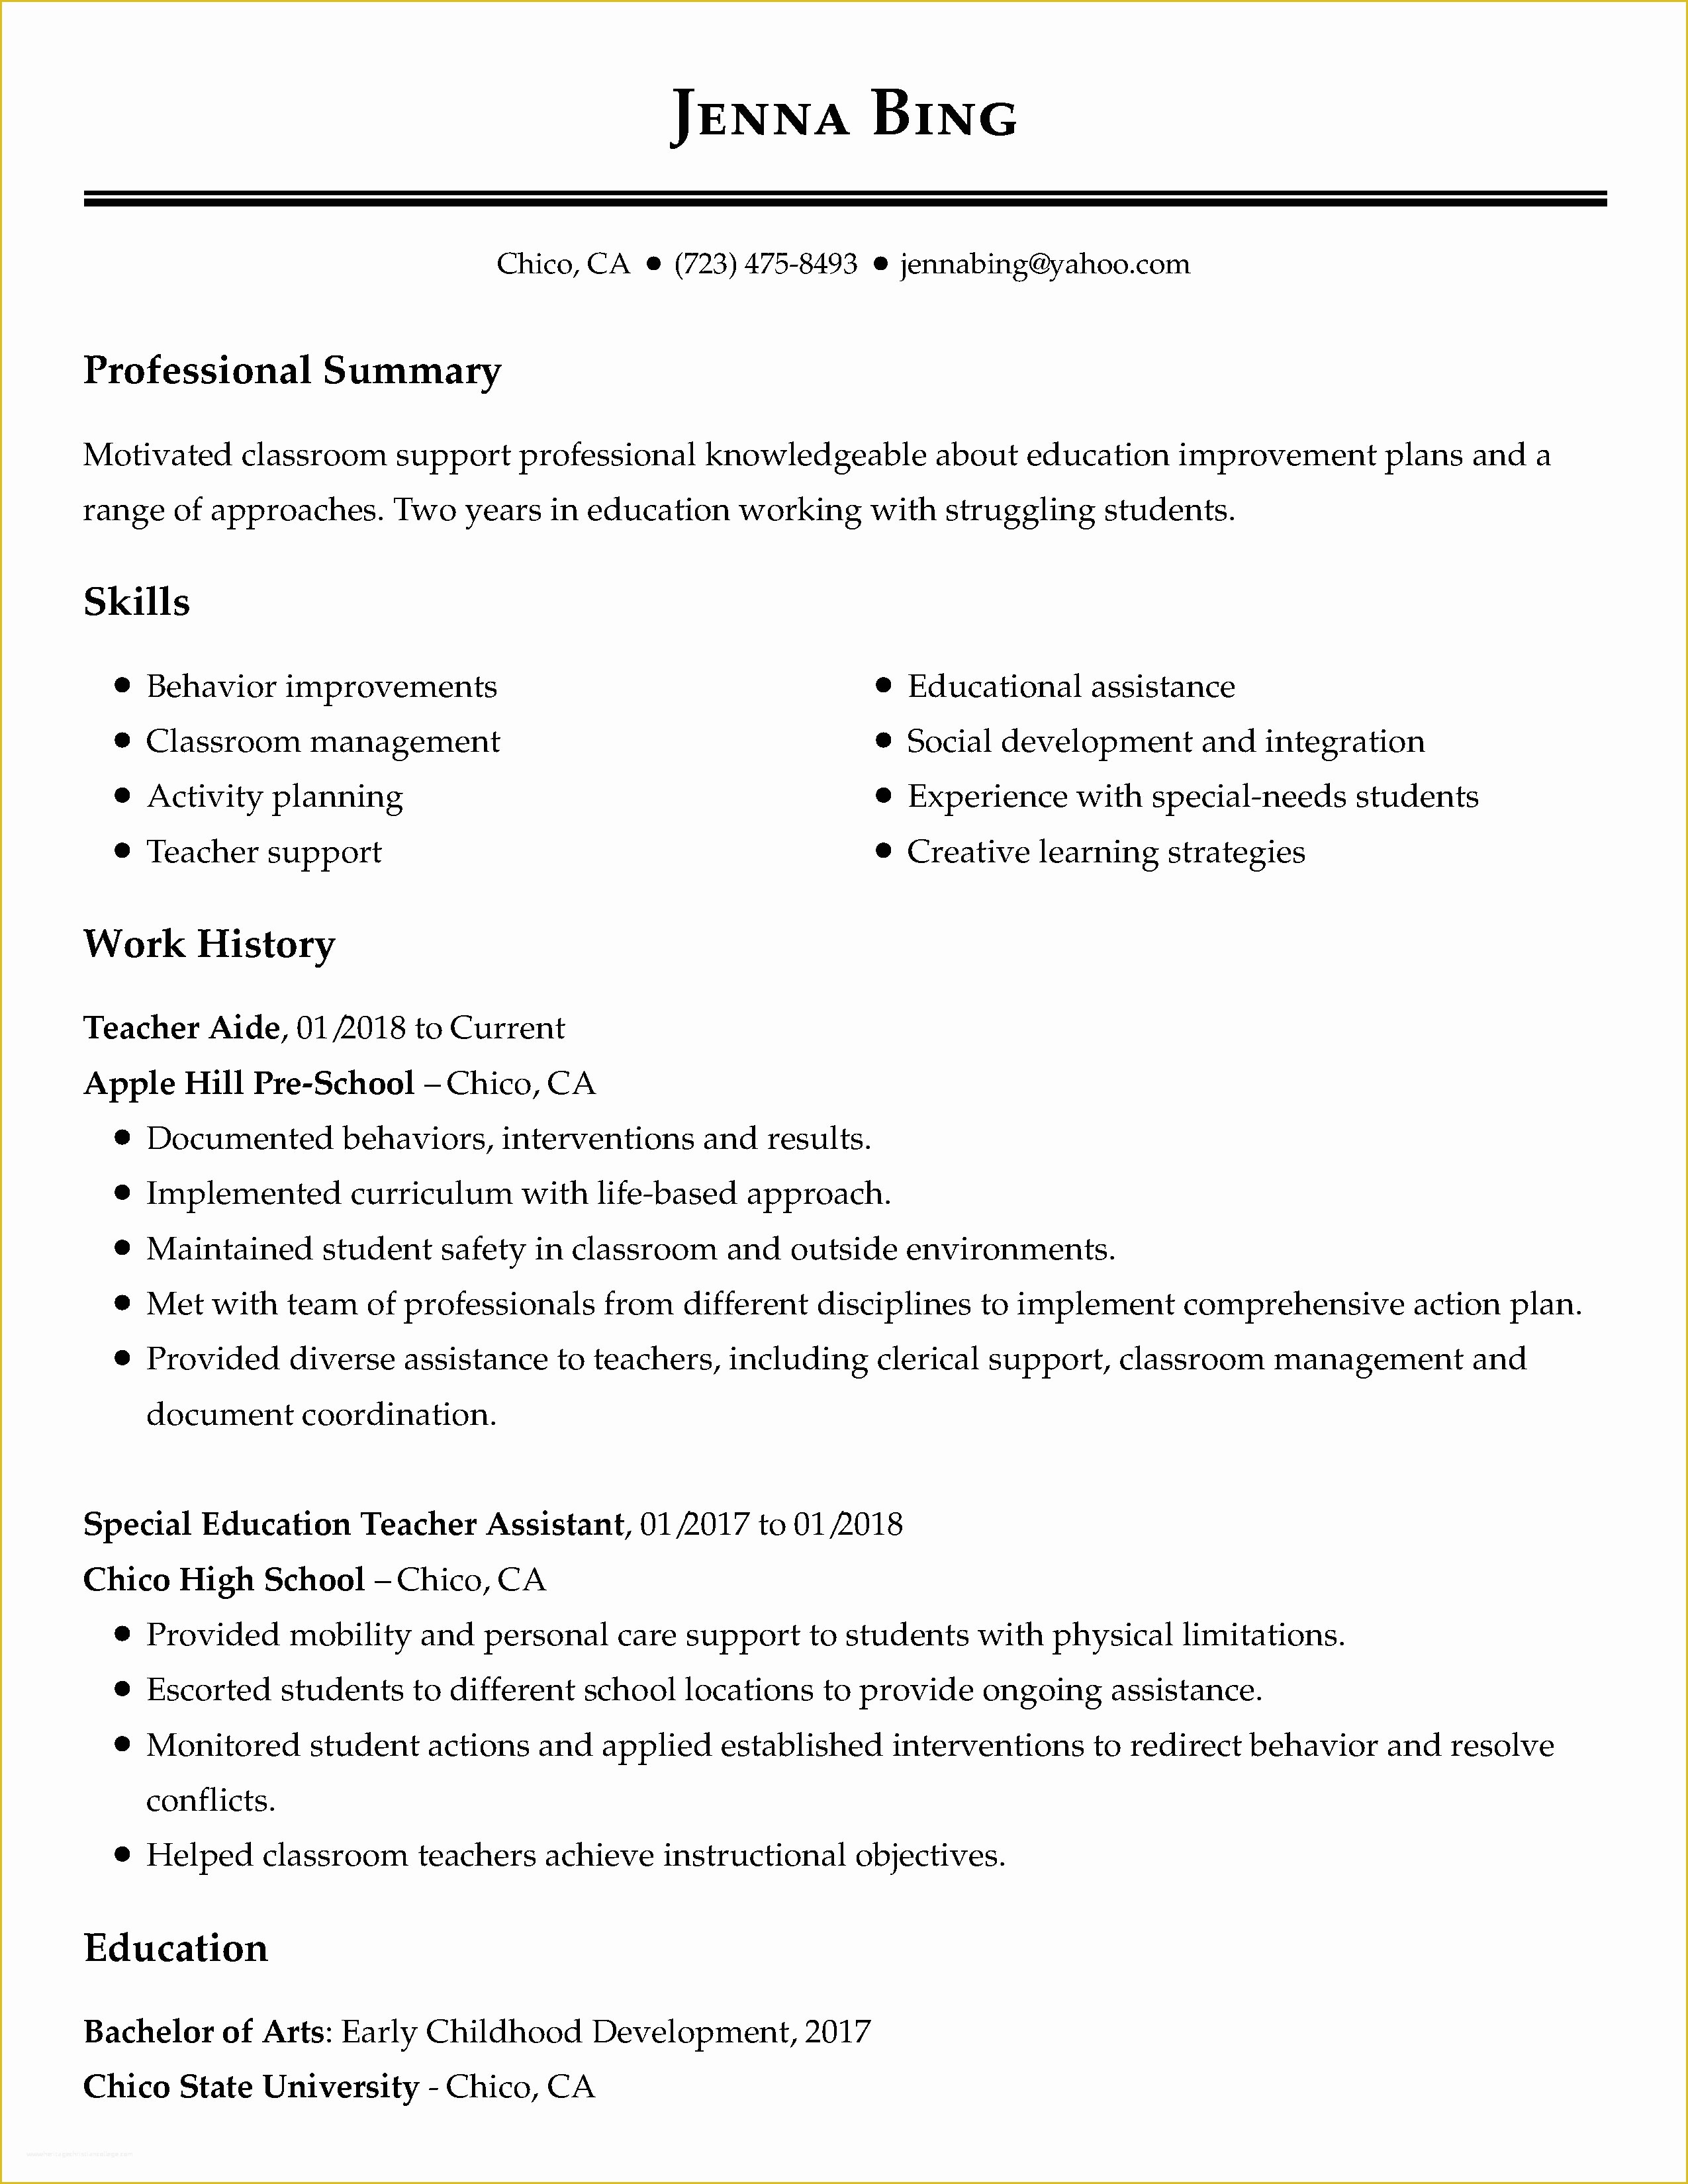 Free Job Specific Resume Templates Of View 30 Samples Of Resumes by Industry & Experience Level